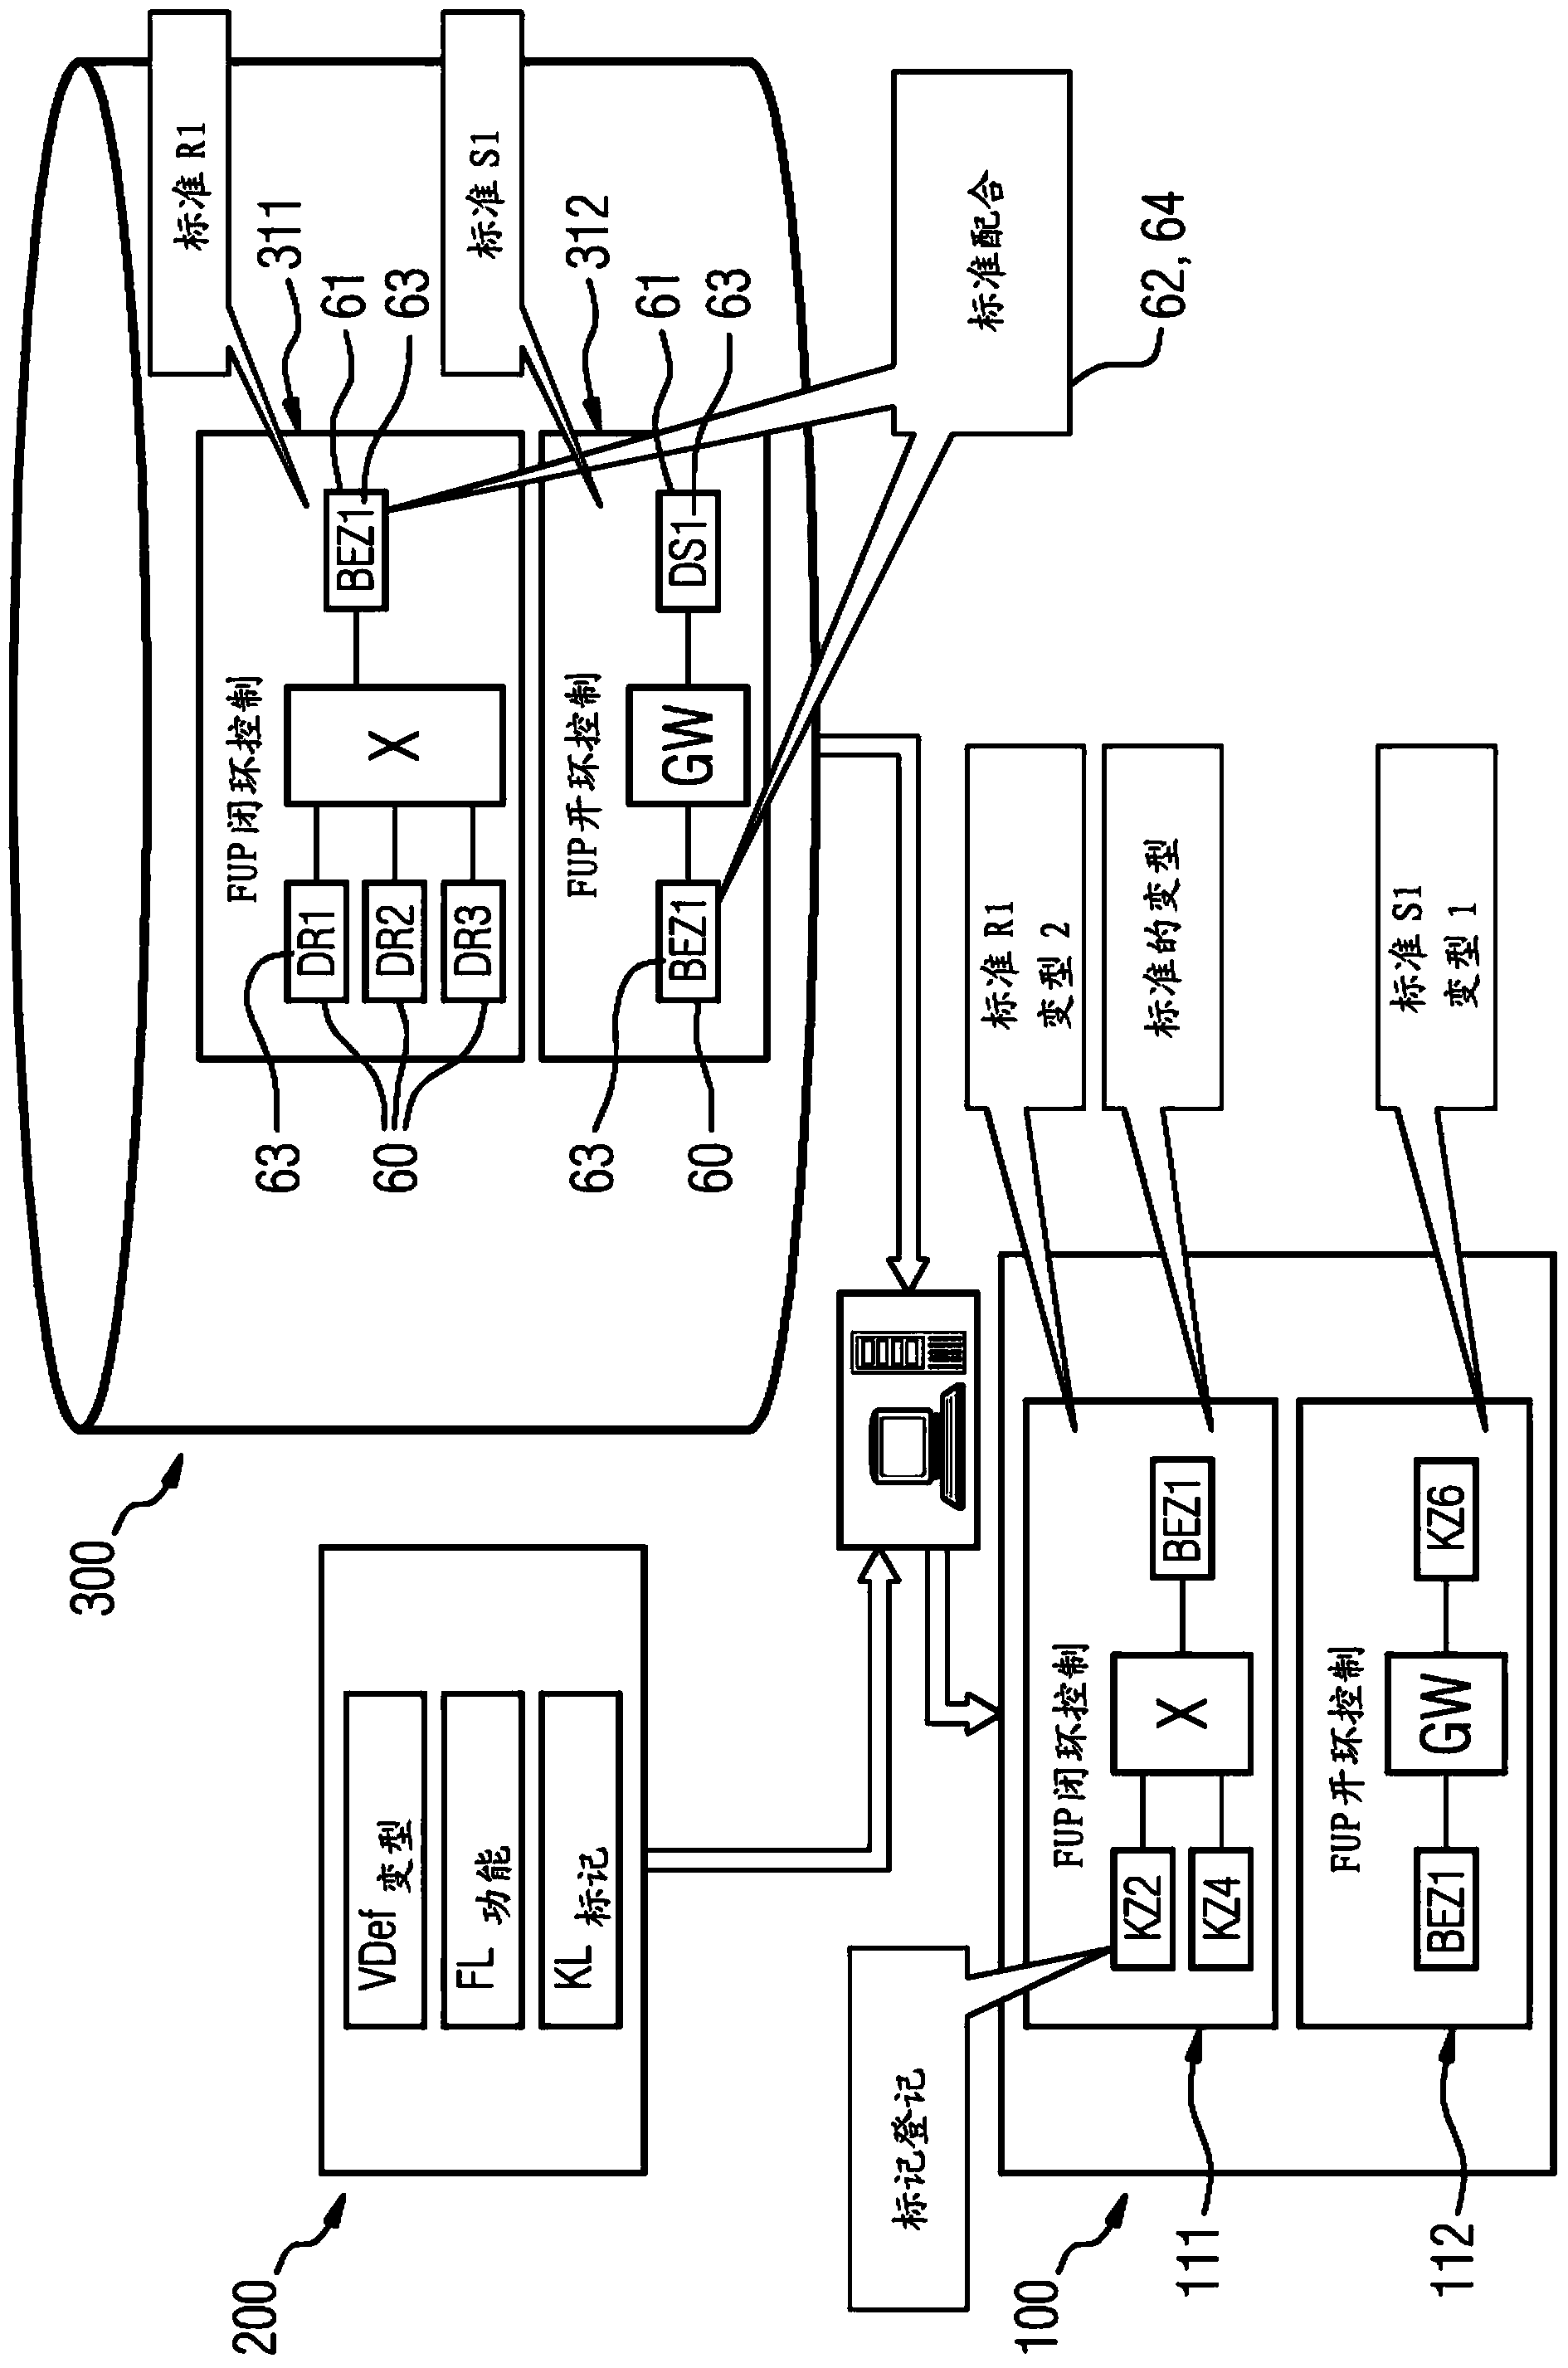 Automated planning of control equipment of a technical system